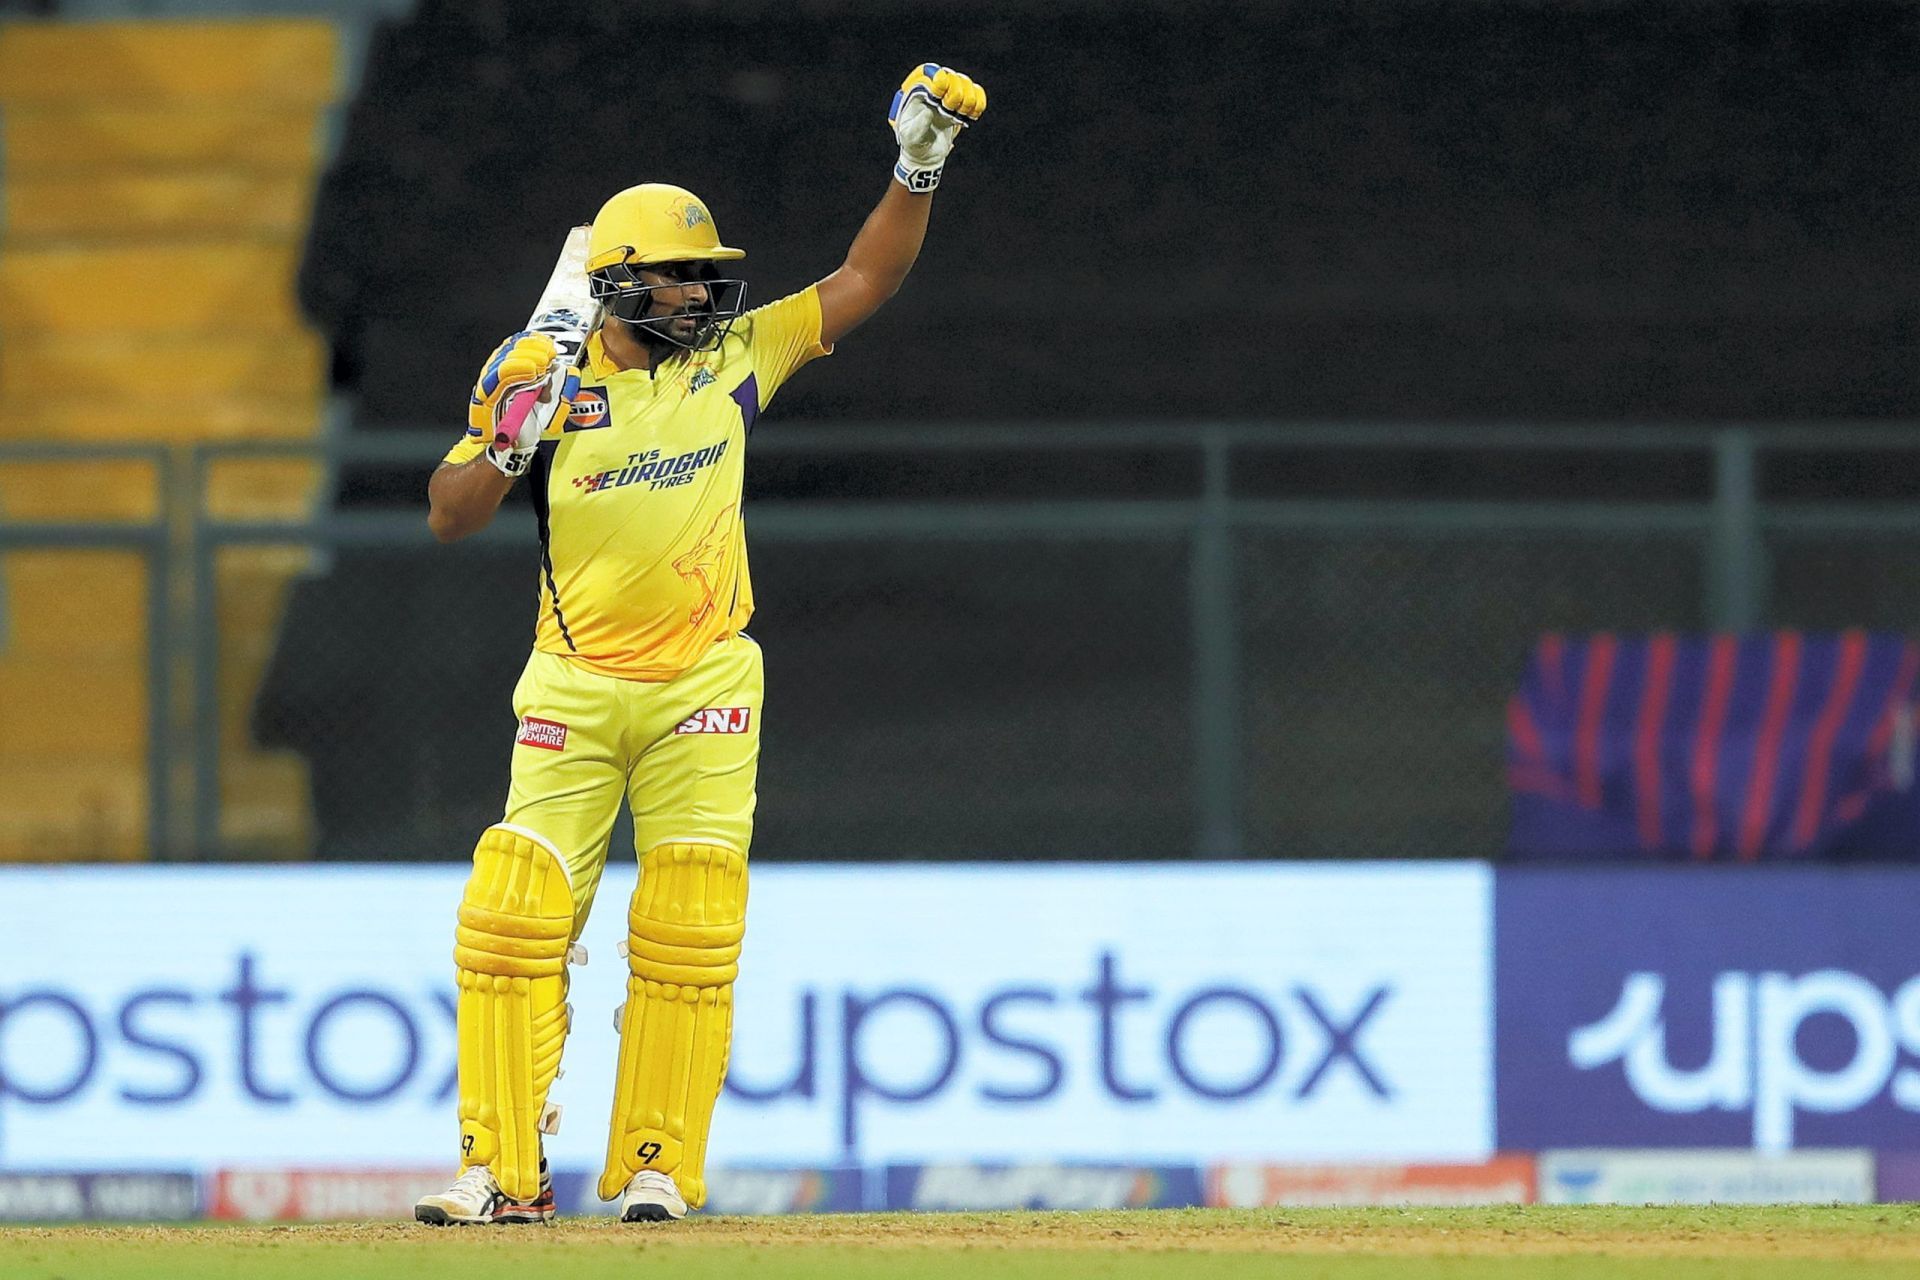 Rayudu changed the momentum in the final for CSK